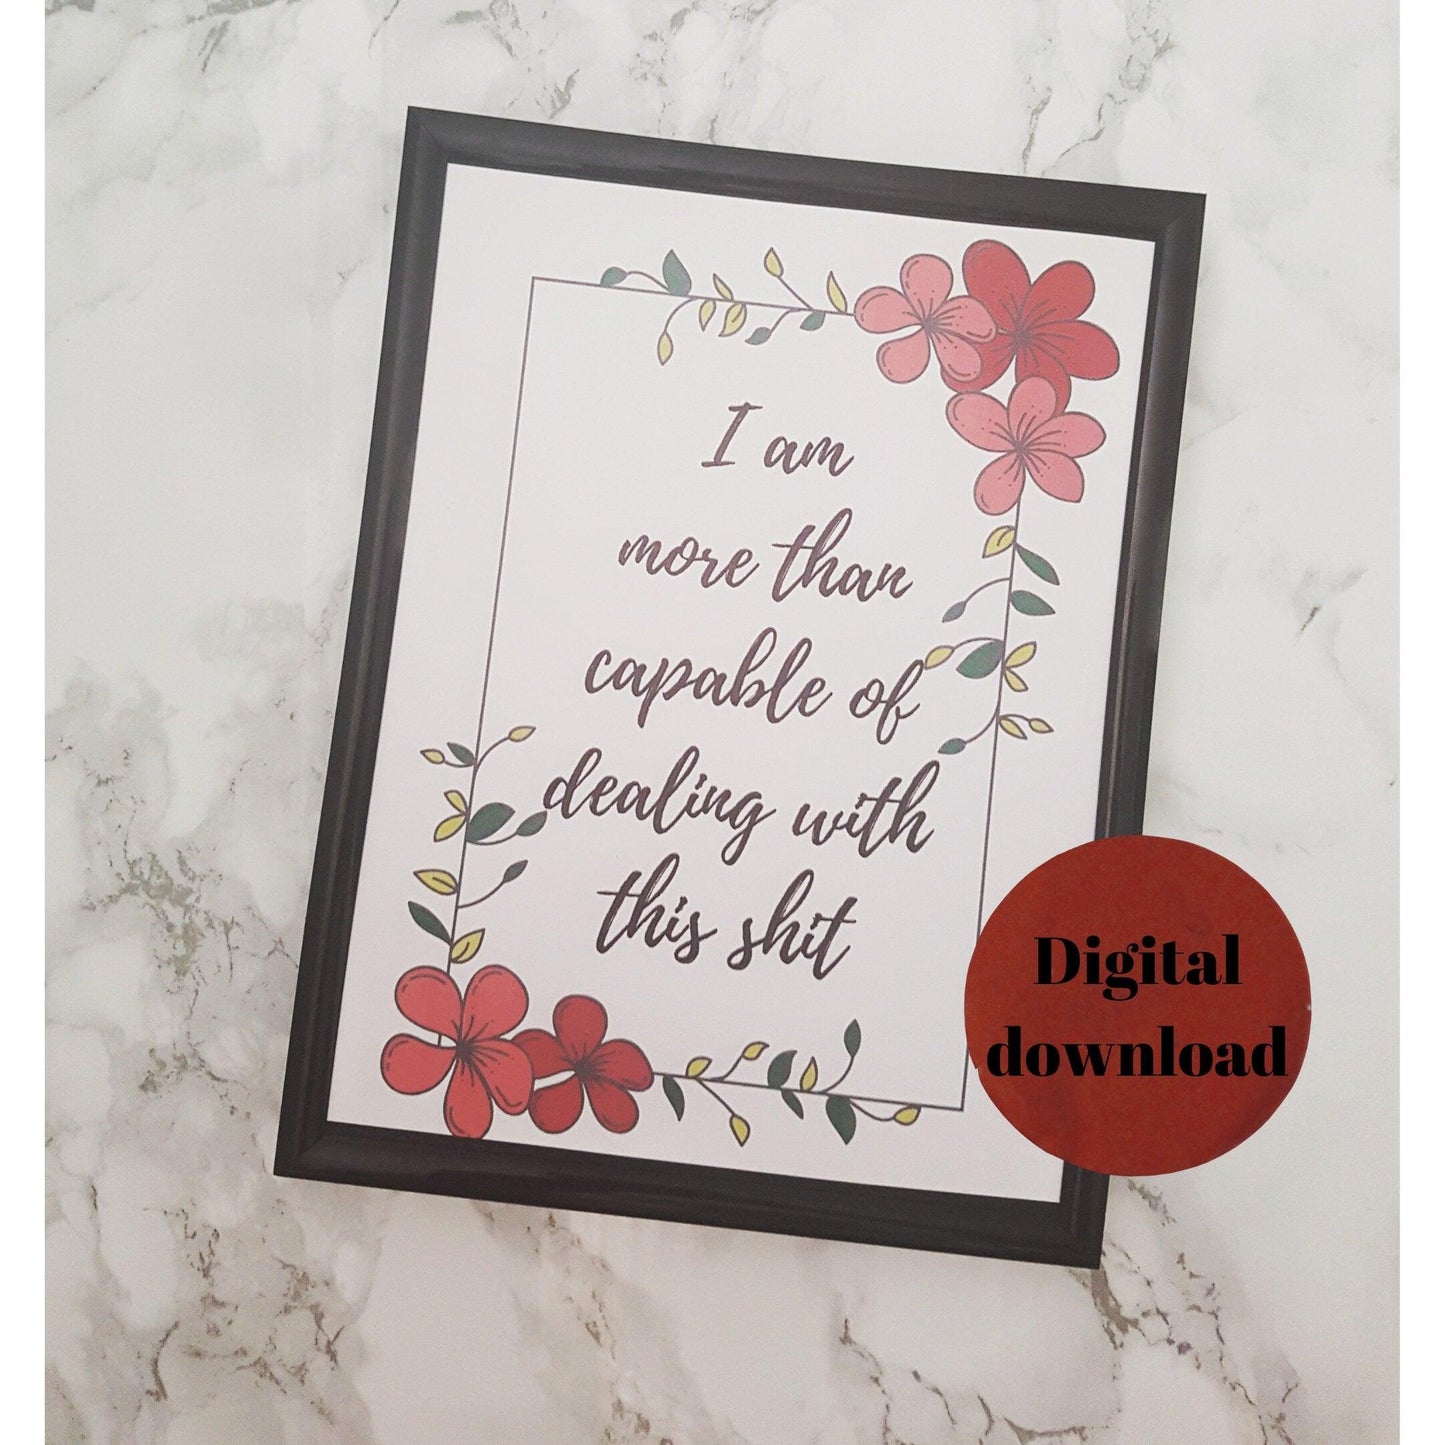 I am more than capable... - digital download motivational quote